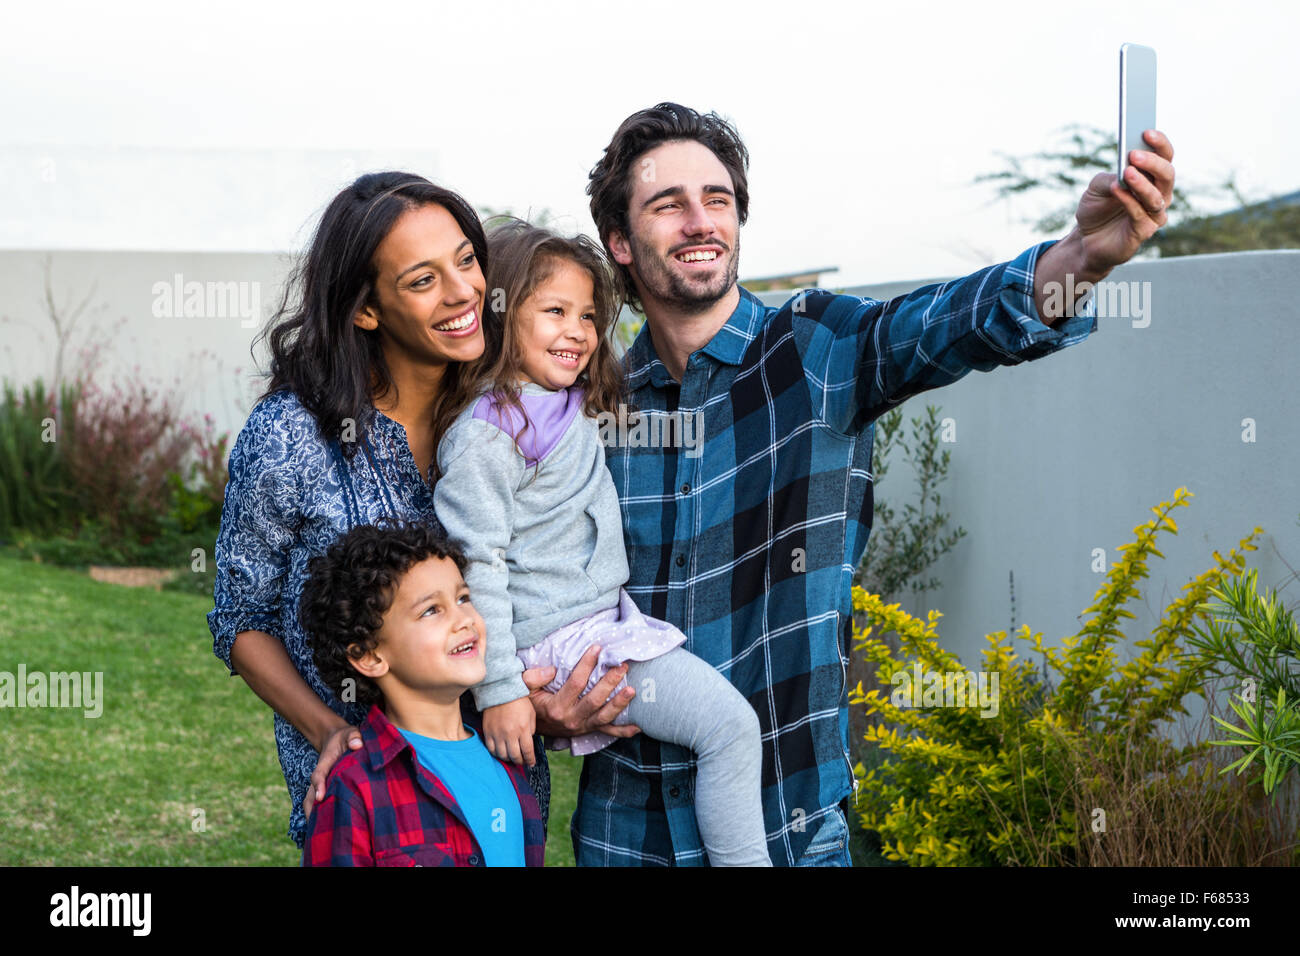 Smiling family prenant selfies Banque D'Images